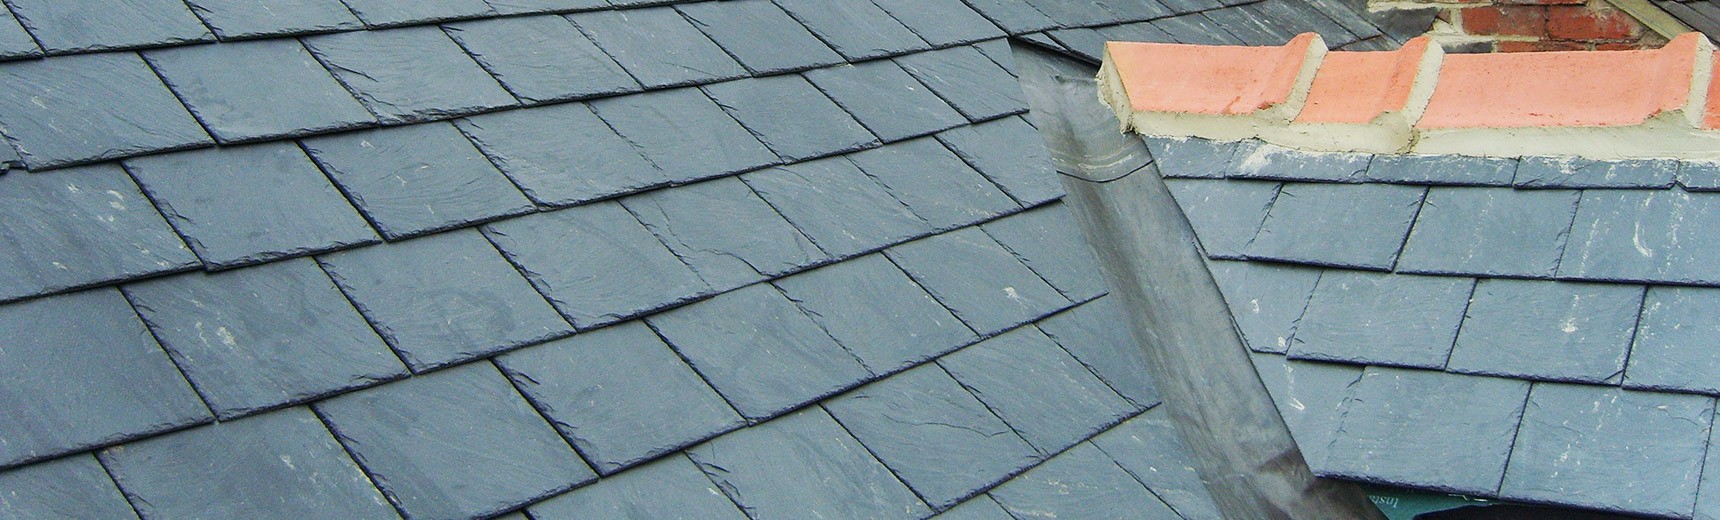 General roofing